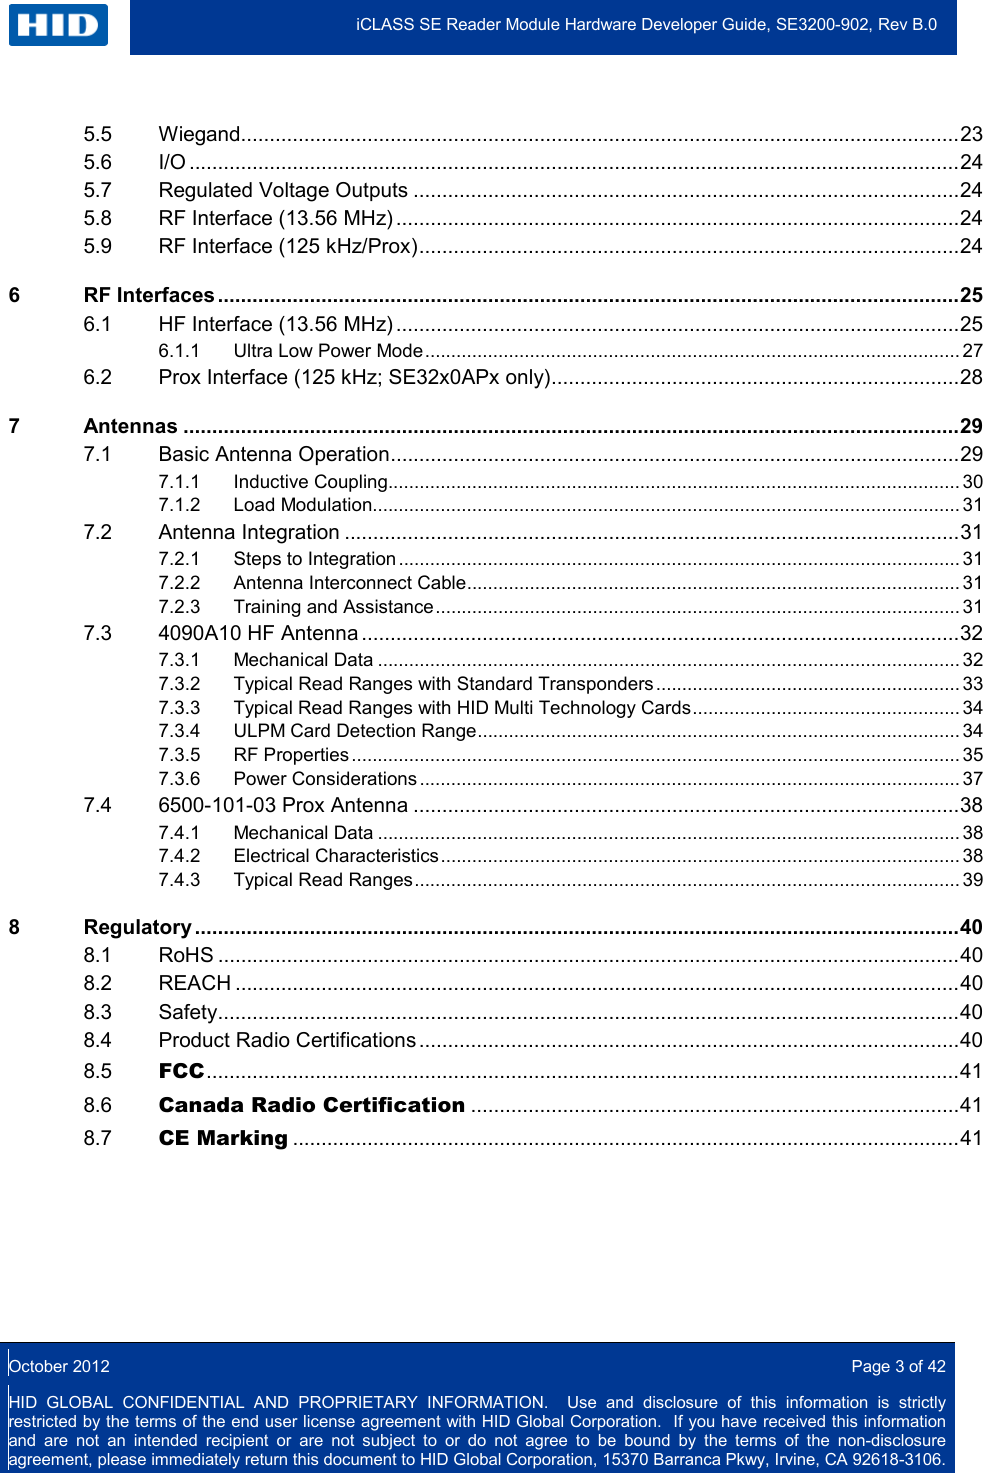  iCLASS SE Reader Module Hardware Developer Guide, SE3200-902, Rev B.0  October 2012  Page 3 of 42 HID GLOBAL CONFIDENTIAL AND PROPRIETARY INFORMATION.  Use and disclosure of this information is strictly restricted by the terms of the end user license agreement with HID Global Corporation.  If you have received this information and are not an intended recipient or are not subject to or do not agree to be bound by the terms of the non-disclosure agreement, please immediately return this document to HID Global Corporation, 15370 Barranca Pkwy, Irvine, CA 92618-3106.  5.5 Wiegand............................................................................................................................. 23 5.6 I/O ...................................................................................................................................... 24 5.7 Regulated Voltage Outputs ............................................................................................... 24 5.8 RF Interface (13.56 MHz) .................................................................................................. 24 5.9 RF Interface (125 kHz/Prox) .............................................................................................. 24 6 RF Interfaces ................................................................................................................................. 25 6.1 HF Interface (13.56 MHz) .................................................................................................. 25 6.1.1 Ultra Low Power Mode ...................................................................................................... 27 6.2 Prox Interface (125 kHz; SE32x0APx only) ....................................................................... 28 7 Antennas ....................................................................................................................................... 29 7.1 Basic Antenna Operation................................................................................................... 29 7.1.1 Inductive Coupling ............................................................................................................. 30 7.1.2 Load Modulation................................................................................................................ 31 7.2 Antenna Integration ........................................................................................................... 31 7.2.1 Steps to Integration ........................................................................................................... 31 7.2.2 Antenna Interconnect Cable .............................................................................................. 31 7.2.3 Training and Assistance .................................................................................................... 31 7.3 4090A10 HF Antenna ........................................................................................................ 32 7.3.1 Mechanical Data ............................................................................................................... 32 7.3.2 Typical Read Ranges with Standard Transponders .......................................................... 33 7.3.3 Typical Read Ranges with HID Multi Technology Cards ................................................... 34 7.3.4 ULPM Card Detection Range ............................................................................................ 34 7.3.5 RF Properties .................................................................................................................... 35 7.3.6 Power Considerations ....................................................................................................... 37 7.4 6500-101-03 Prox Antenna ............................................................................................... 38 7.4.1 Mechanical Data ............................................................................................................... 38 7.4.2 Electrical Characteristics ................................................................................................... 38 7.4.3 Typical Read Ranges ........................................................................................................ 39 8 Regulatory ..................................................................................................................................... 40 8.1 RoHS ................................................................................................................................. 40 8.2 REACH .............................................................................................................................. 40 8.3 Safety ................................................................................................................................. 40 8.4 Product Radio Certifications .............................................................................................. 40 8.5 FCC ................................................................................................................................... 41 8.6 Canada Radio Certification ..................................................................................... 41 8.7 CE Marking .................................................................................................................... 41     